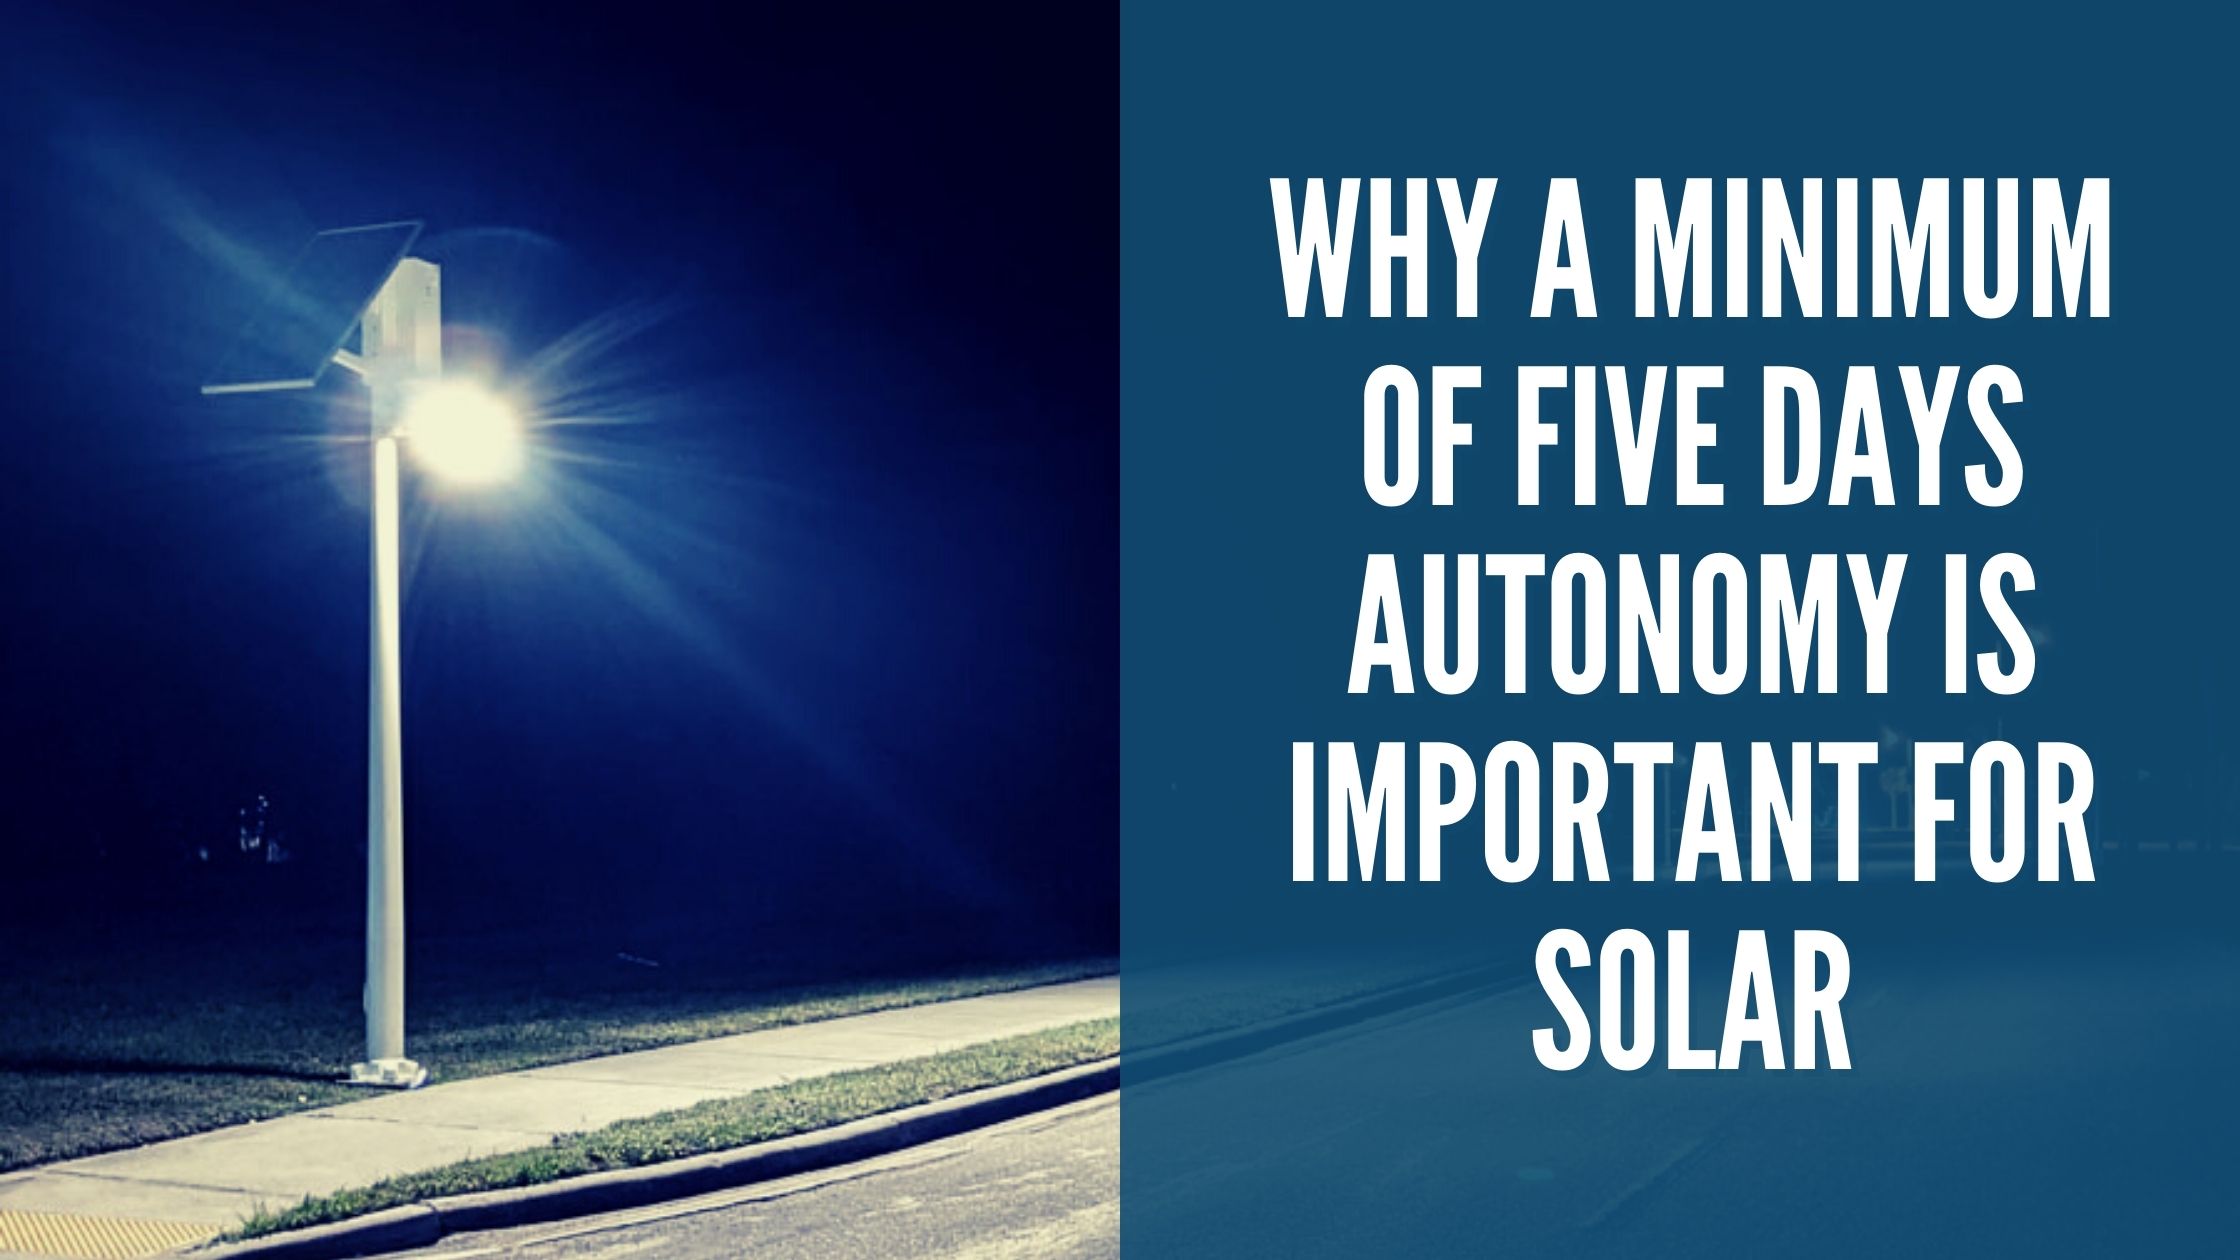 Why a Minimum of Five Days Autonomy is Important for Solar